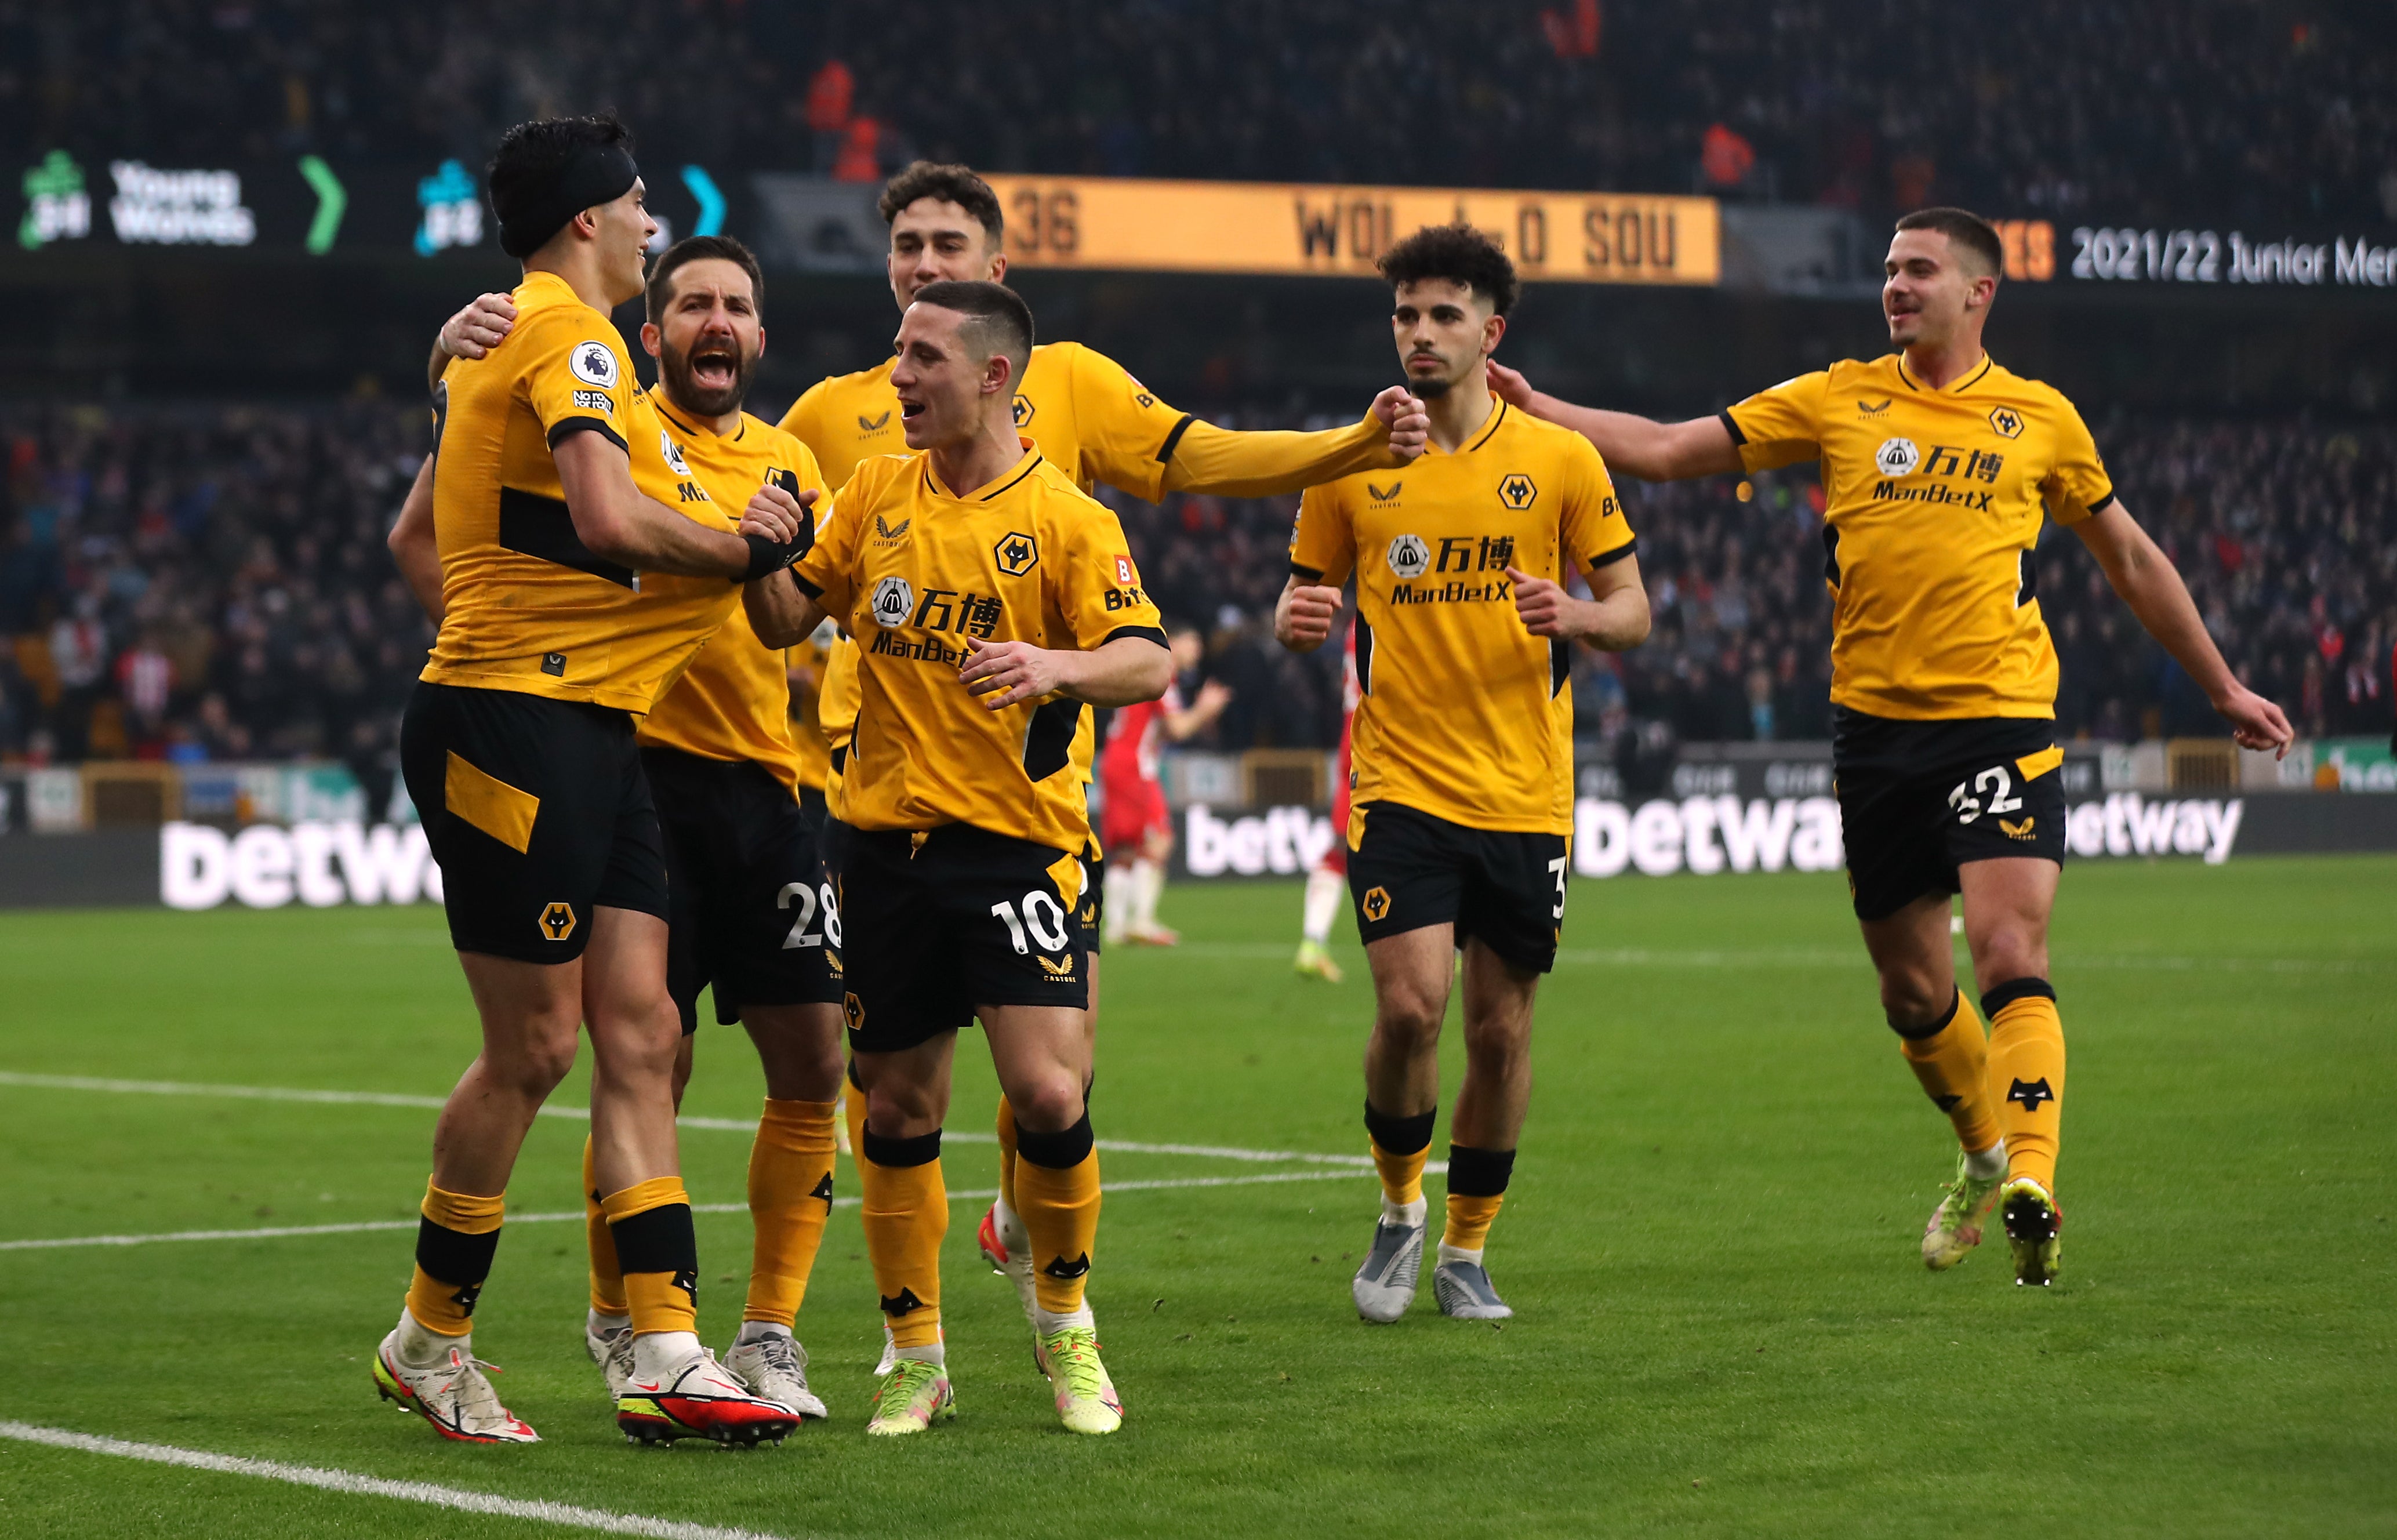 Wolves moved ahead of Southampton in the table following a 3-1 win at Molineux (Bradley Collyer/PA)